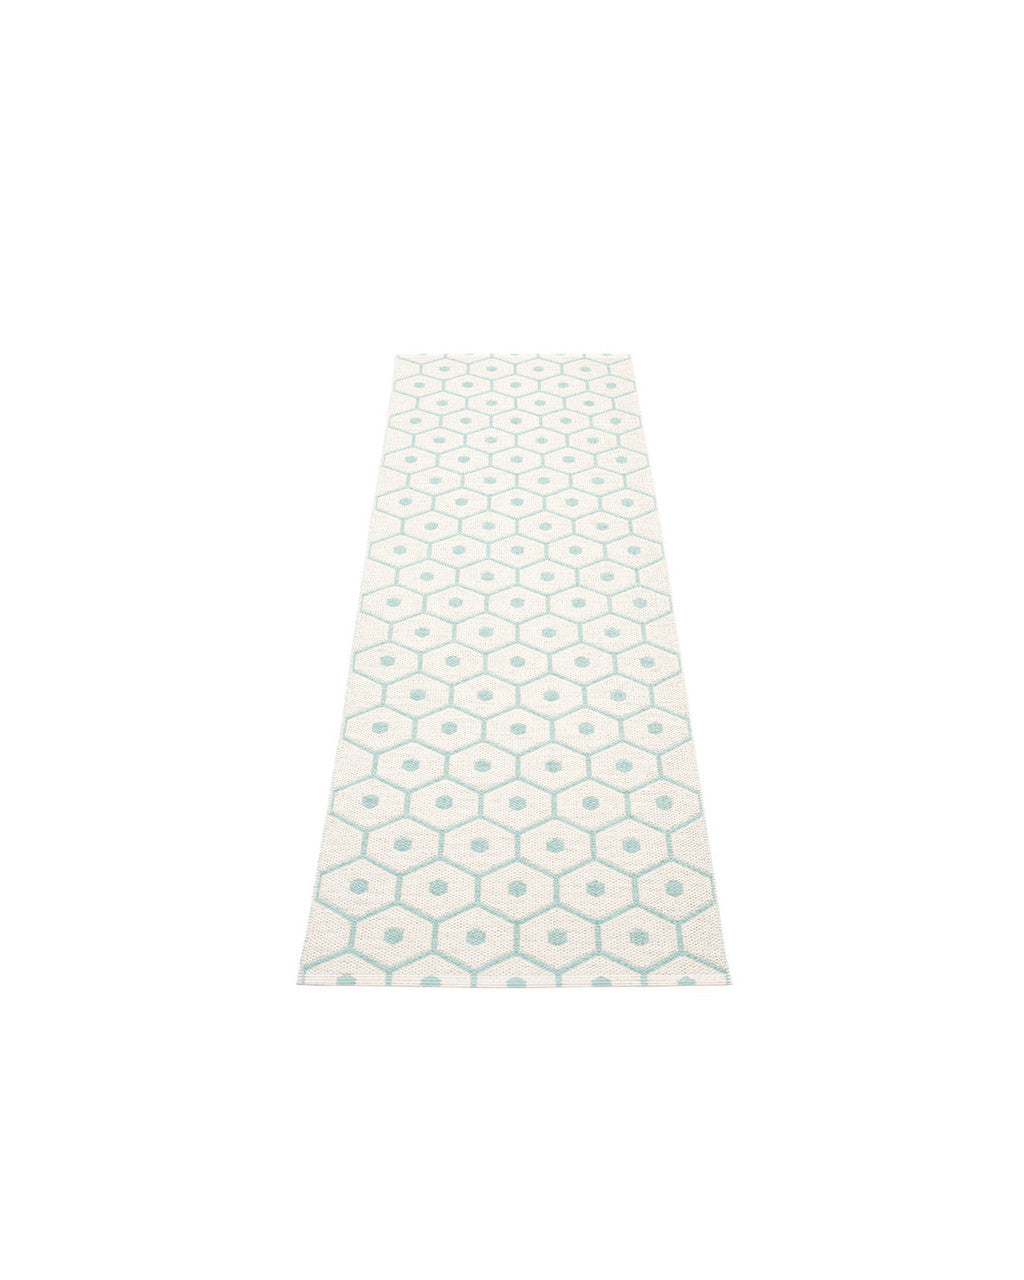 Rug HONEY Pale Turquoise by Pappelina